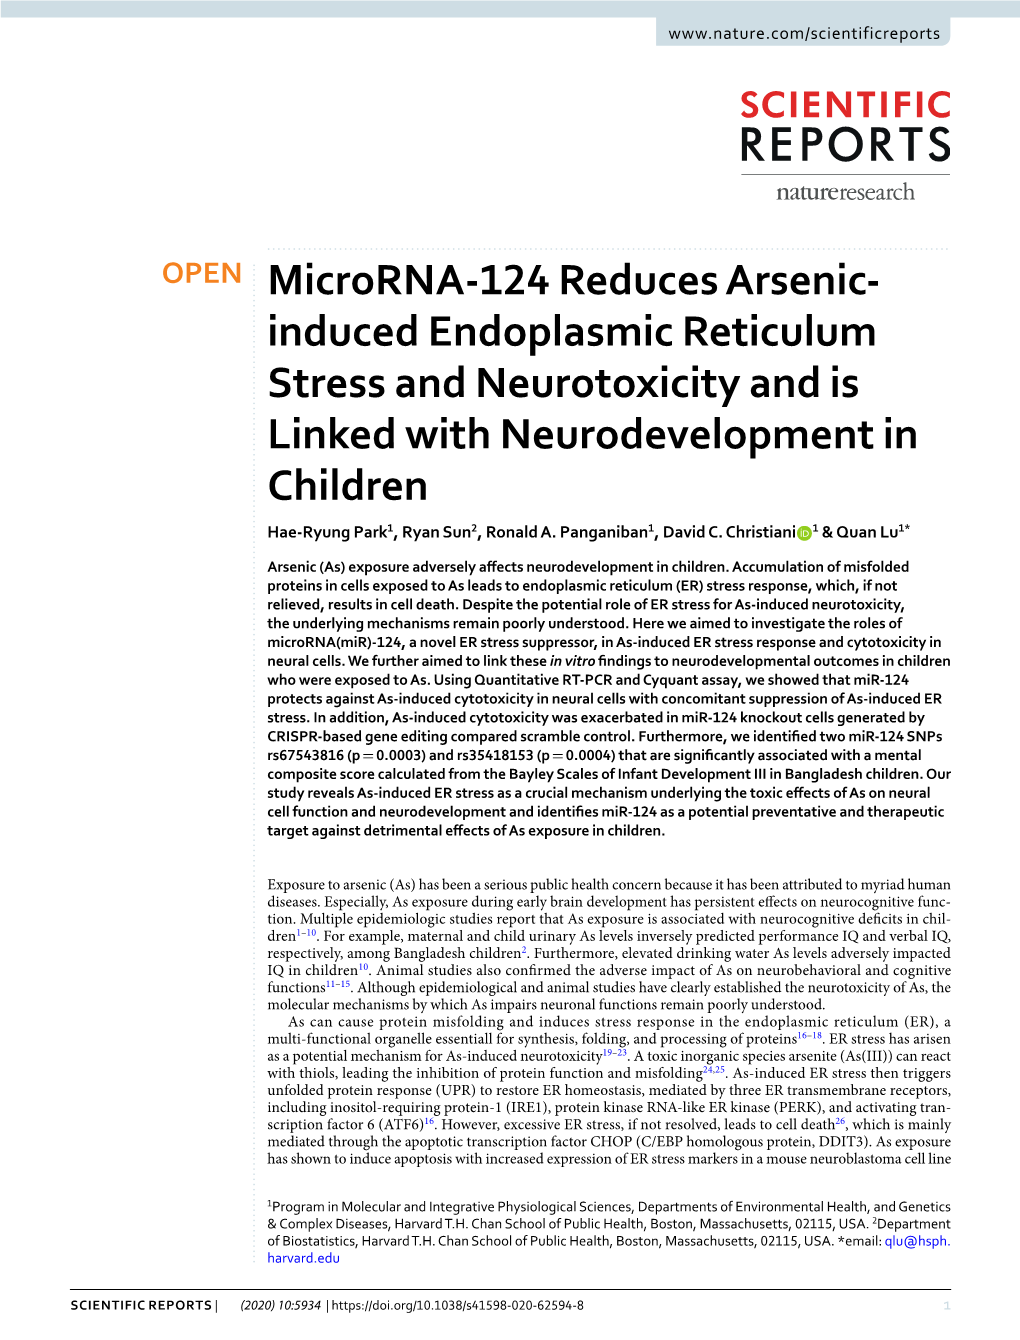 Microrna-124 Reduces Arsenic-Induced Endoplasmic Reticulum Stress and Neurotoxicity and Is Linked with Neurodevelopment in Child